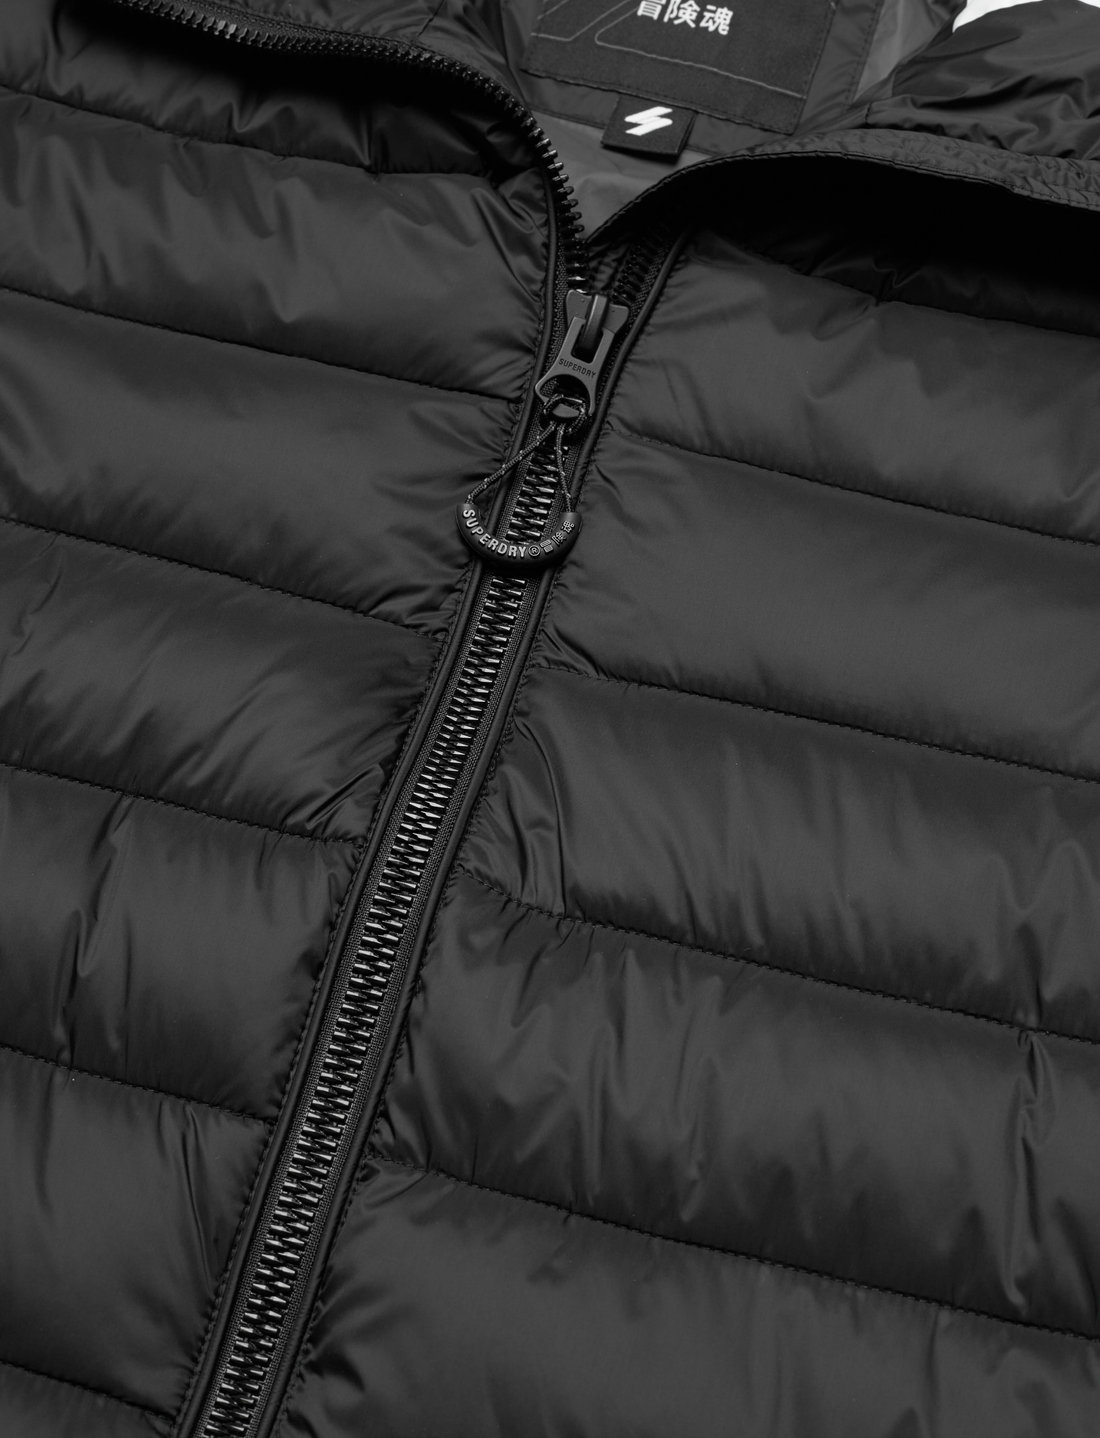 - Mtn and Jkt Buy Code jackets Superdry Fast easy at Hood delivery online Fuji Padded Non €. from Superdry returns 99.99 Boozt.com.